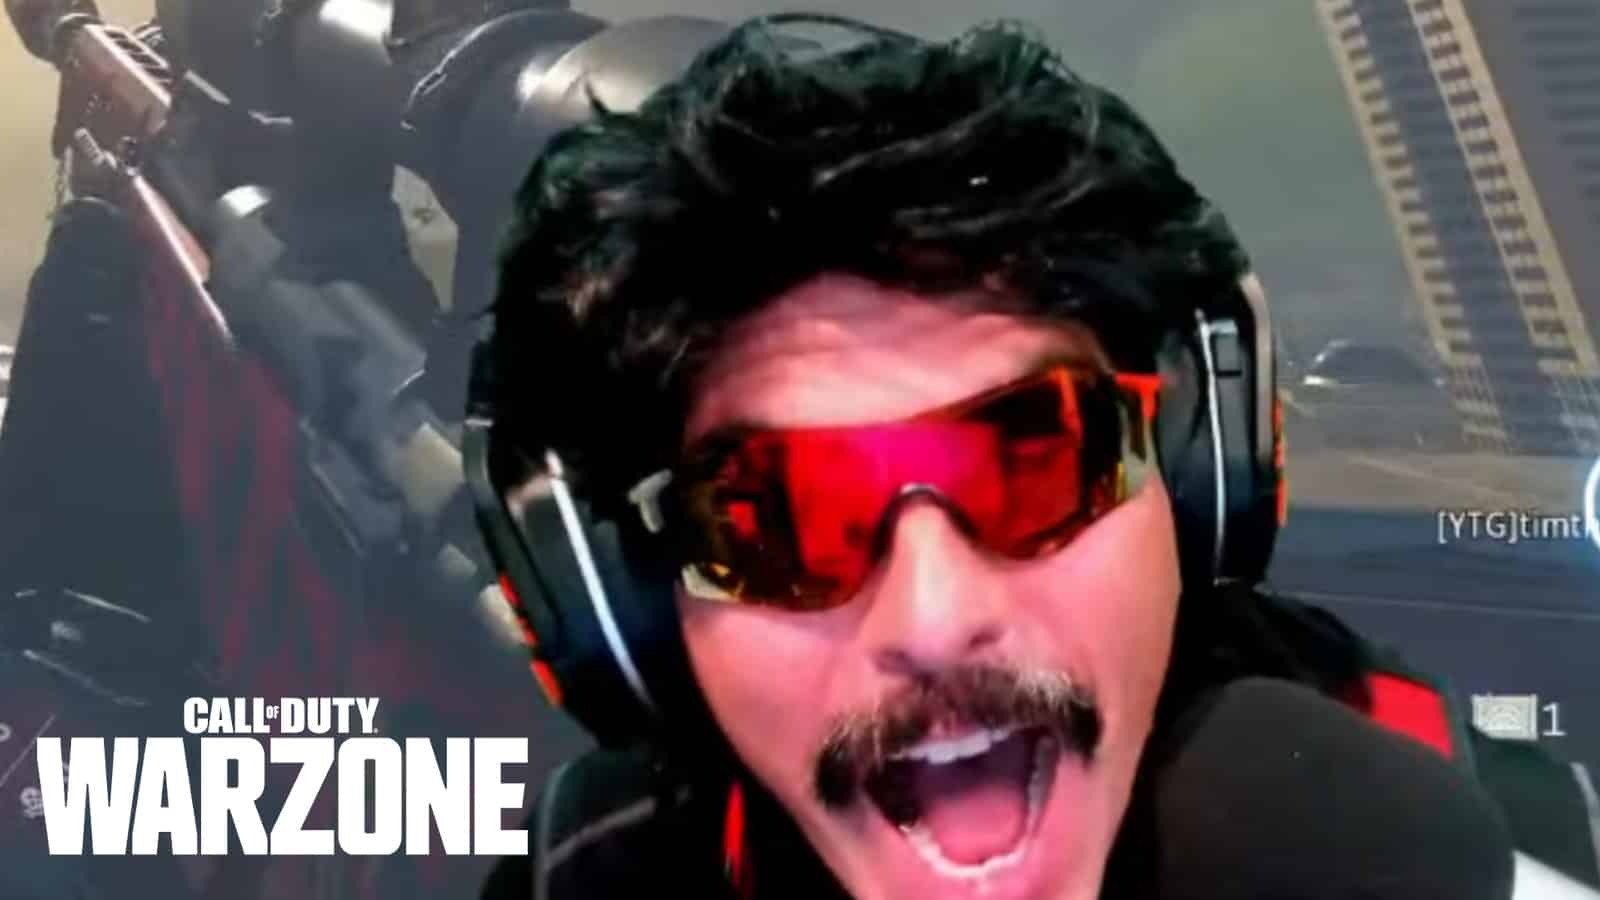 Dr Disrespect freaks out in warzone